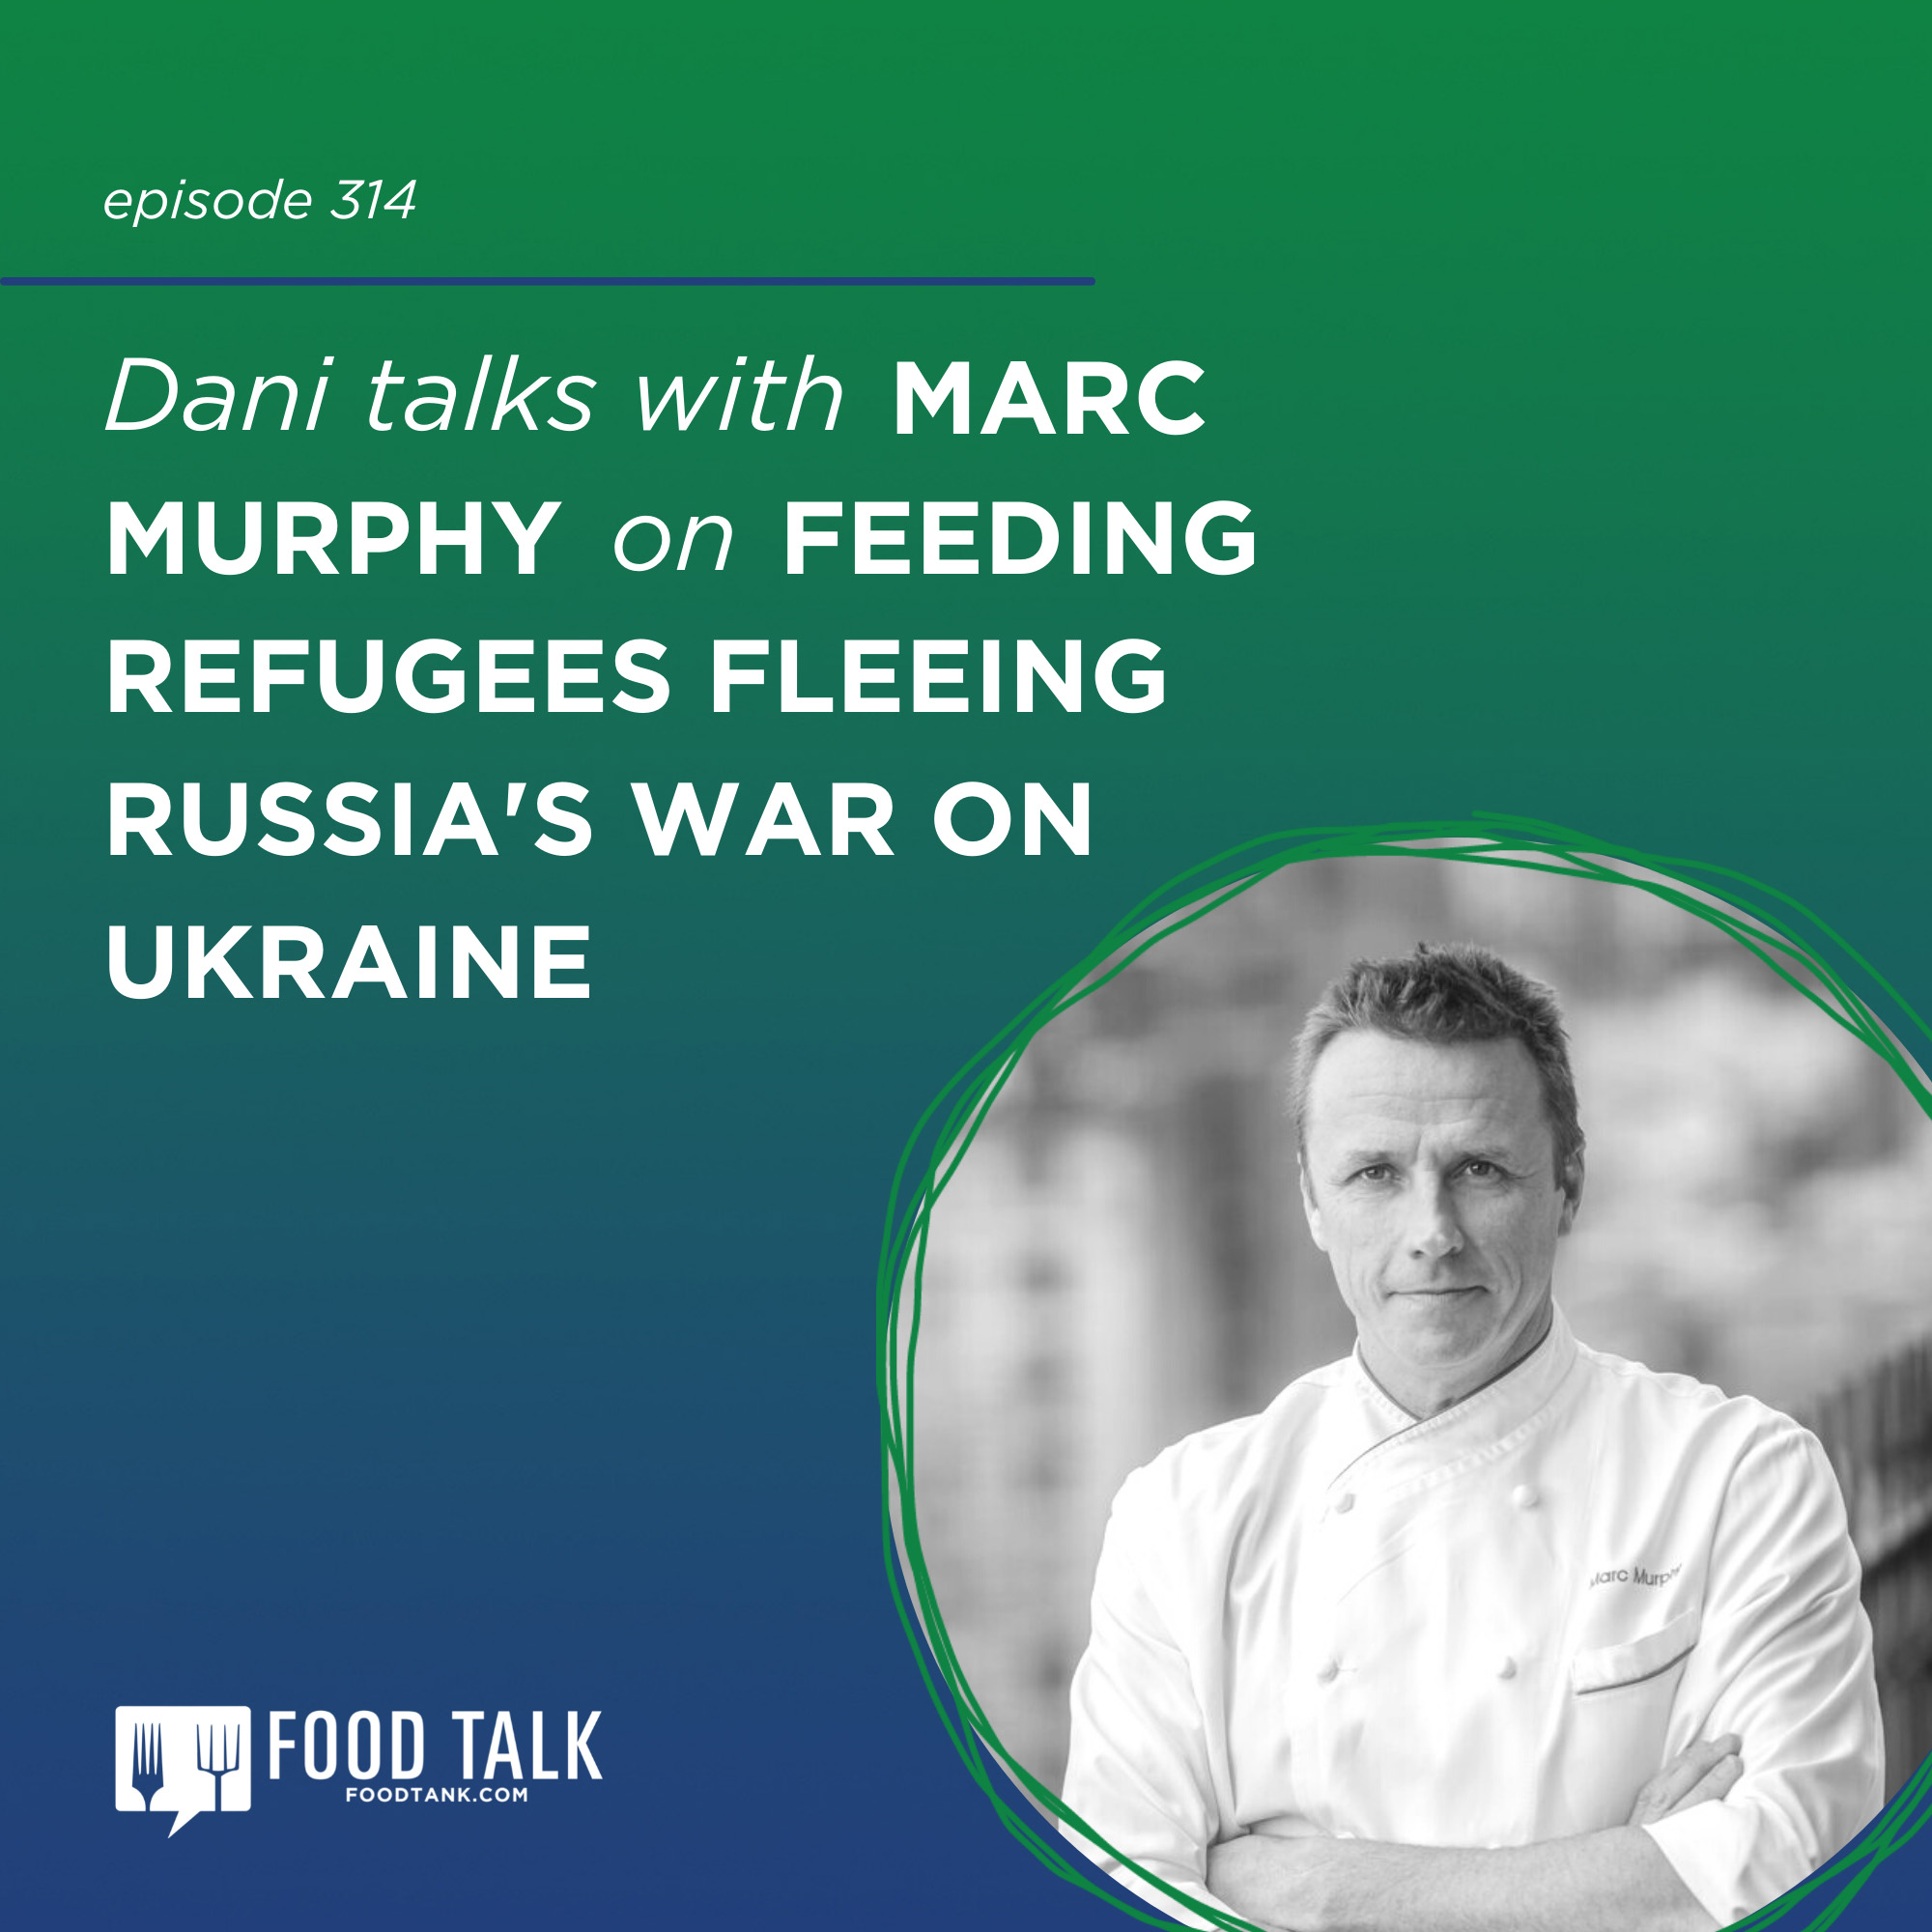 https://podcasts.apple.com/us/podcast/314-chef-marc-murphy-on-feeding-refugees-fleeing-russias/id1434128568?i=1000555258992